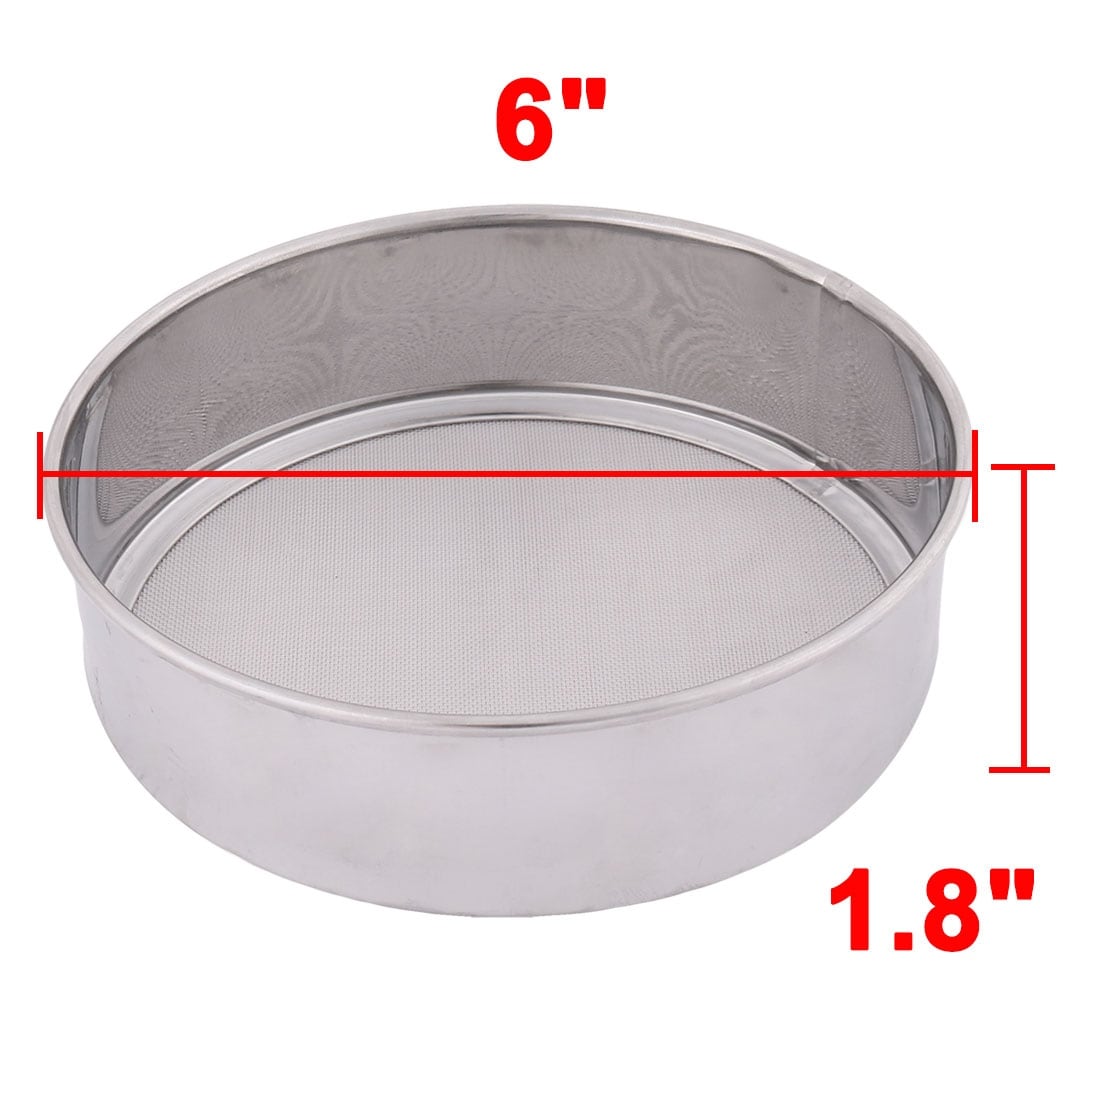 1pc Stainless Steel Flour Sifter, Single Hand Operation For Baking